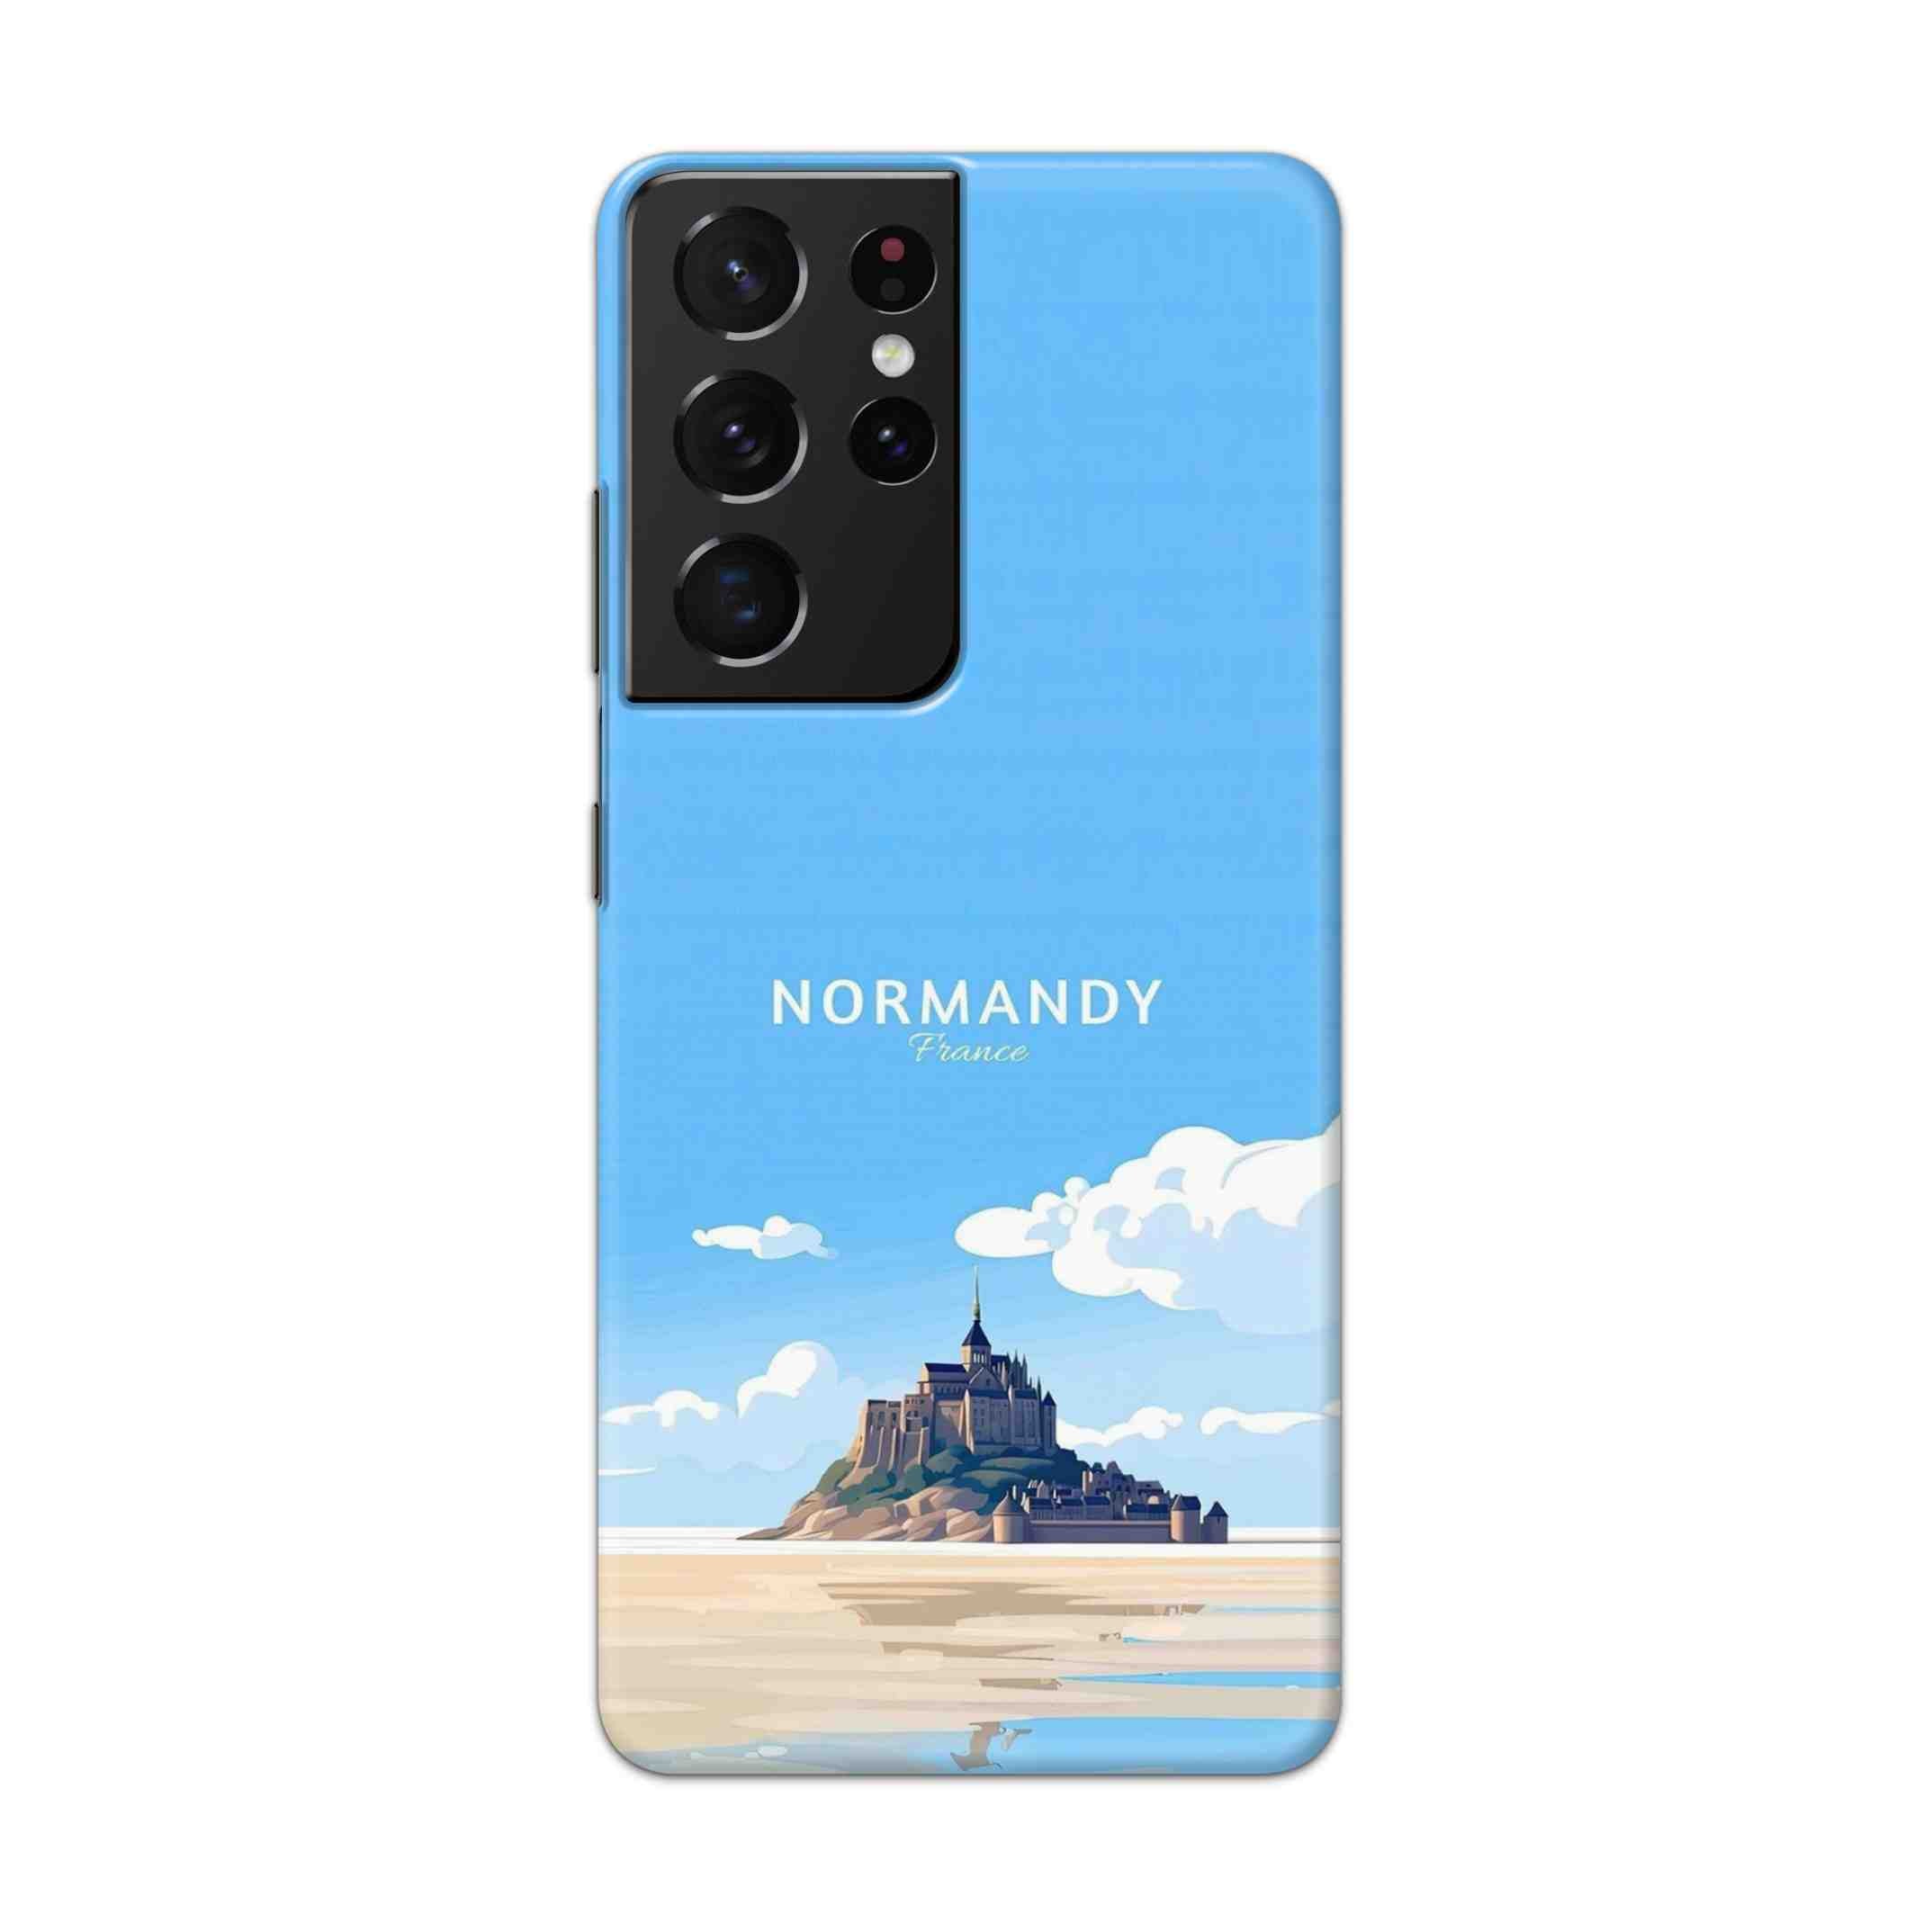 Buy Normandy Hard Back Mobile Phone Case Cover For Samsung Galaxy S21 Ultra Online